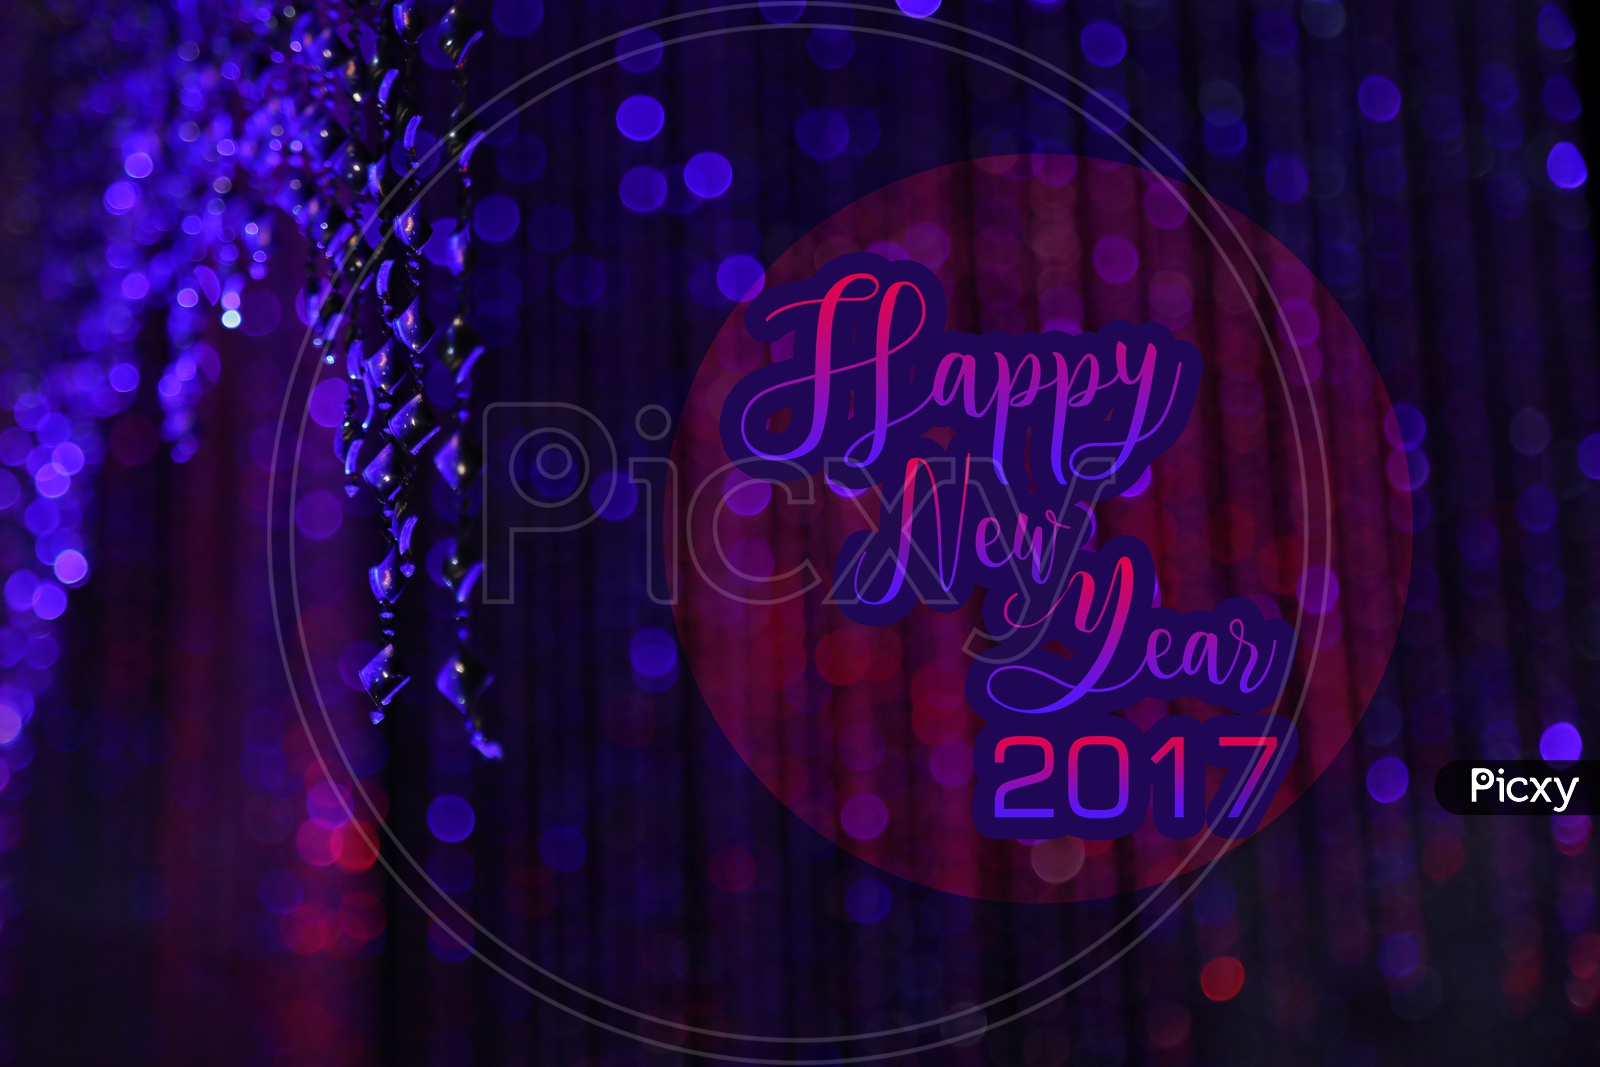 Happy New year greeting cards